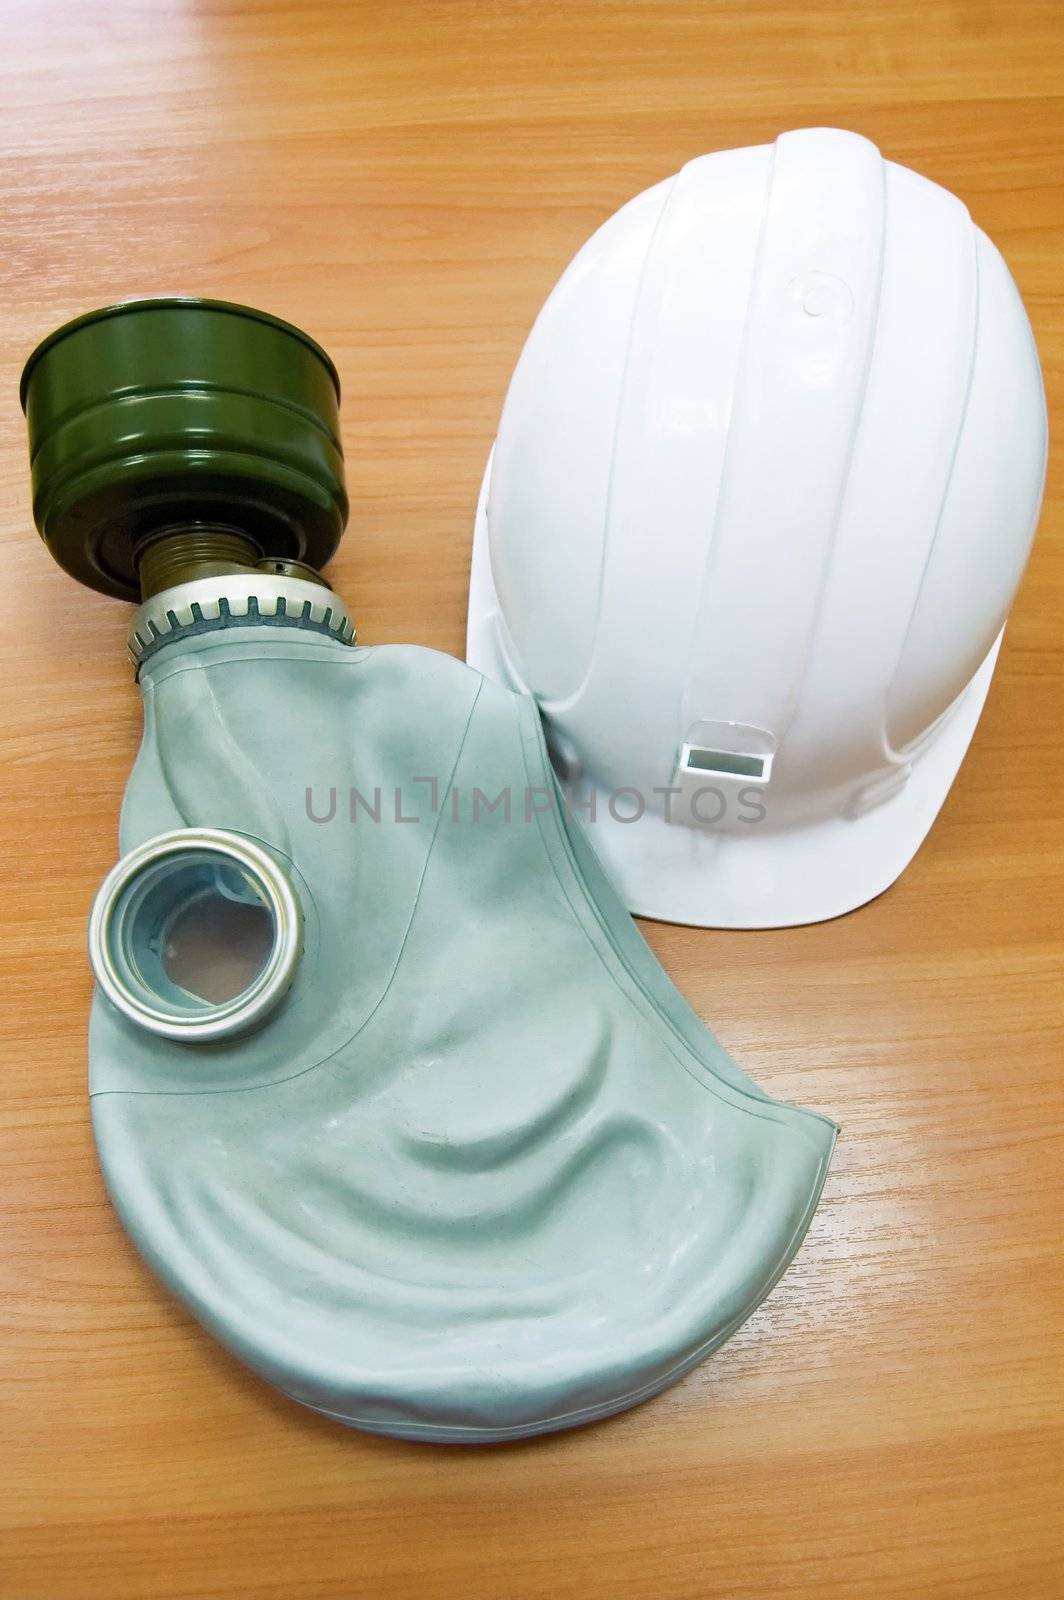 The white helmet and gas mask on the background of a wooden tabletop